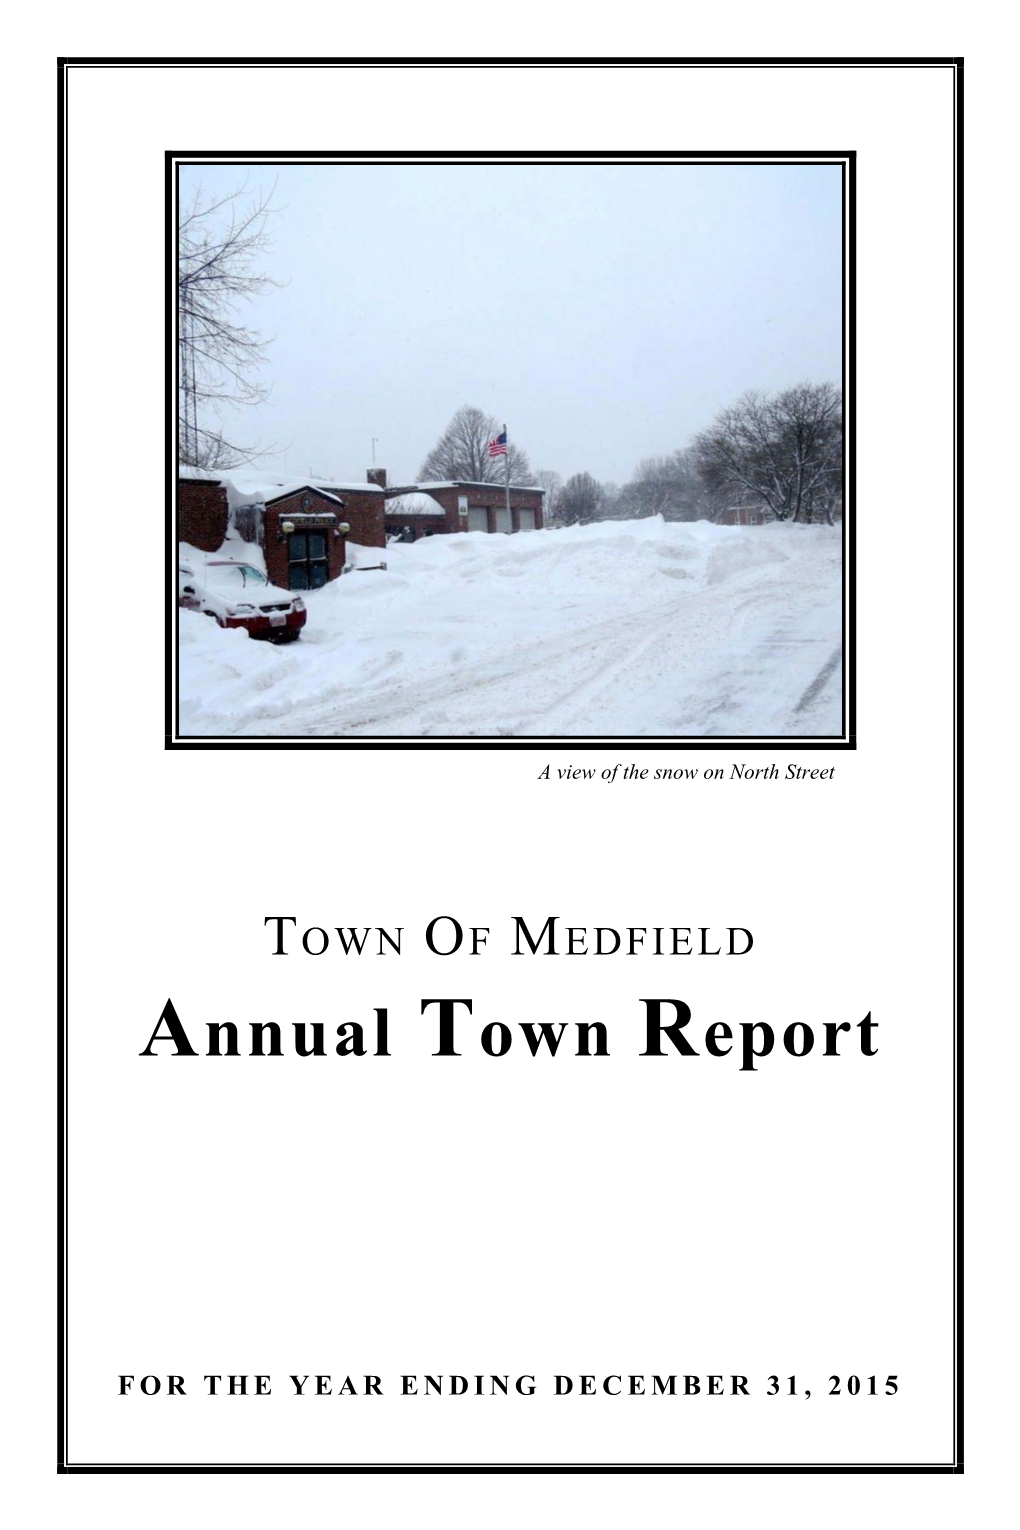 2015 Annual Town Report